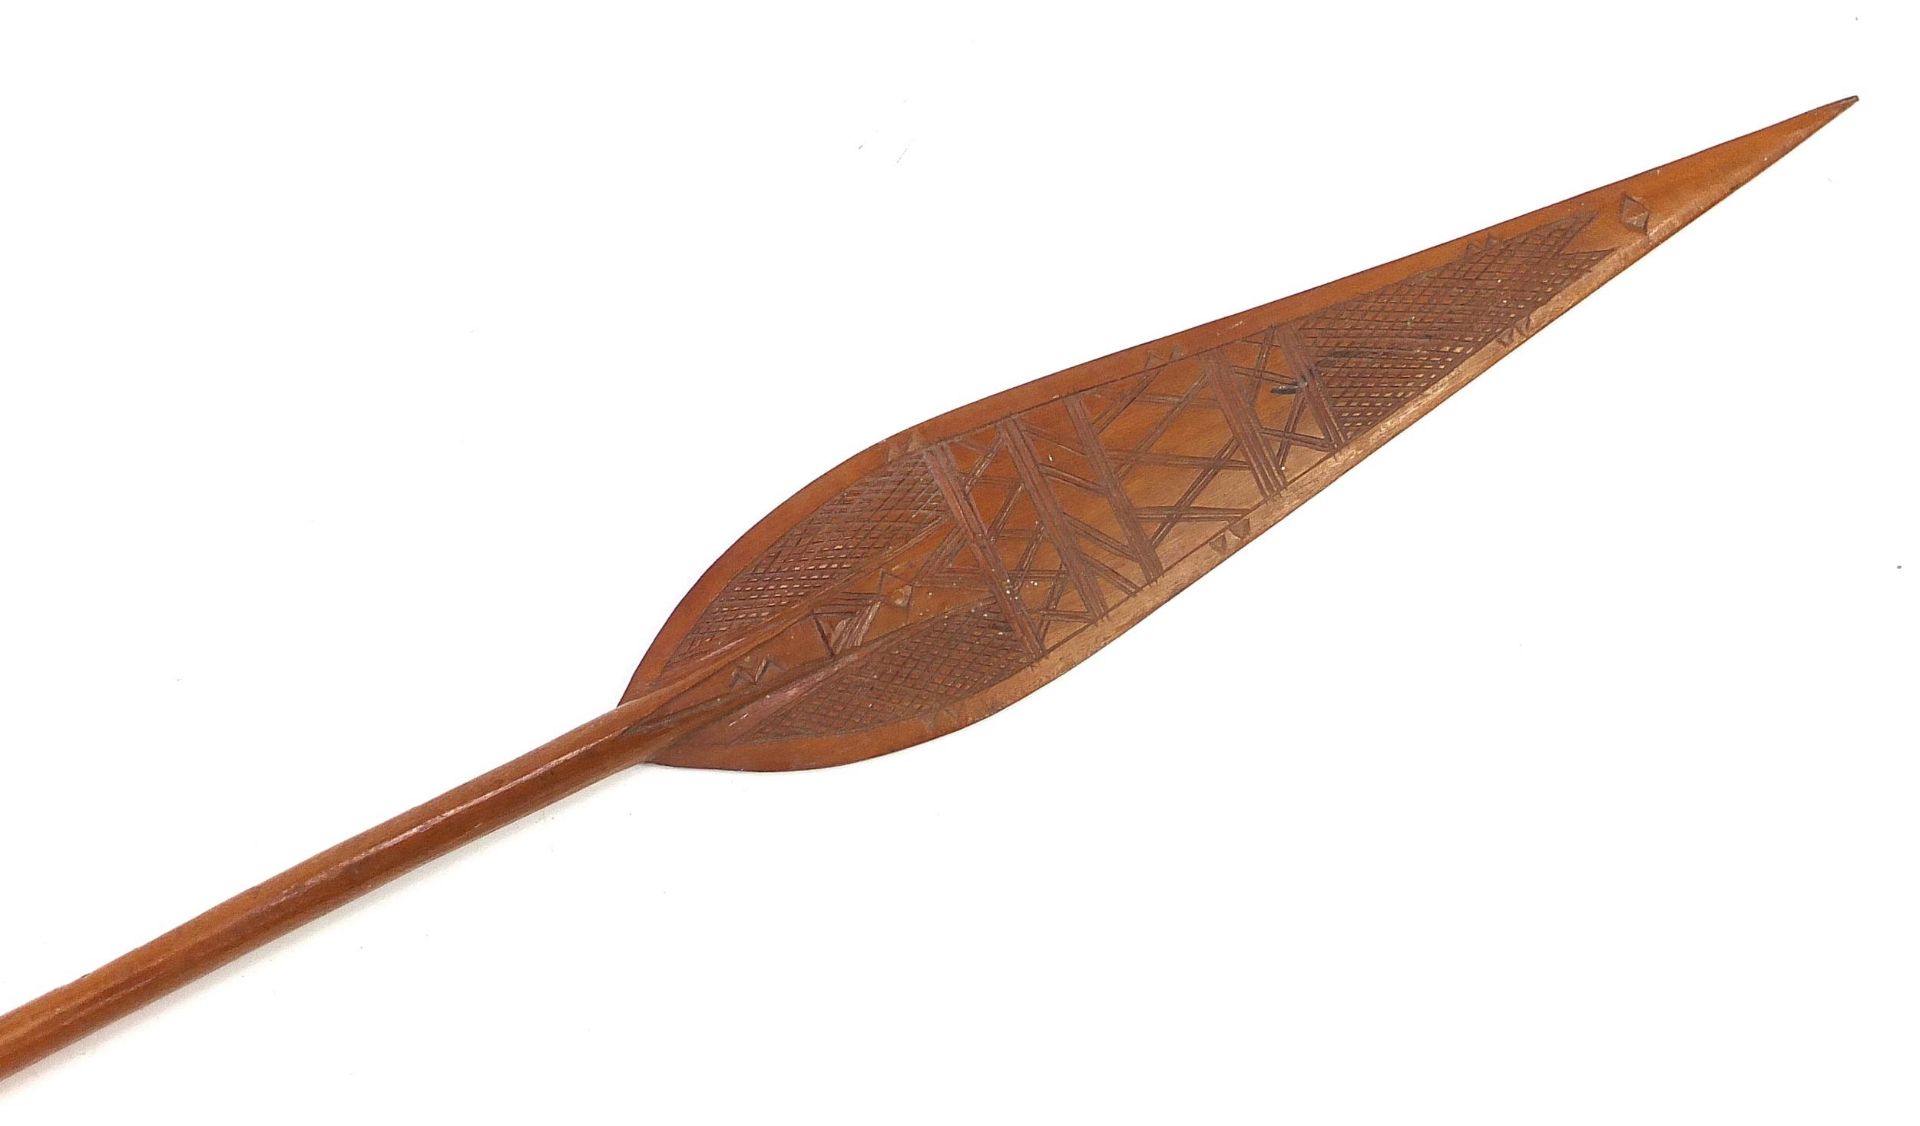 African tribal interest Duala canoe paddle from Cameroon carved with geometric motifs, 155.5cm in